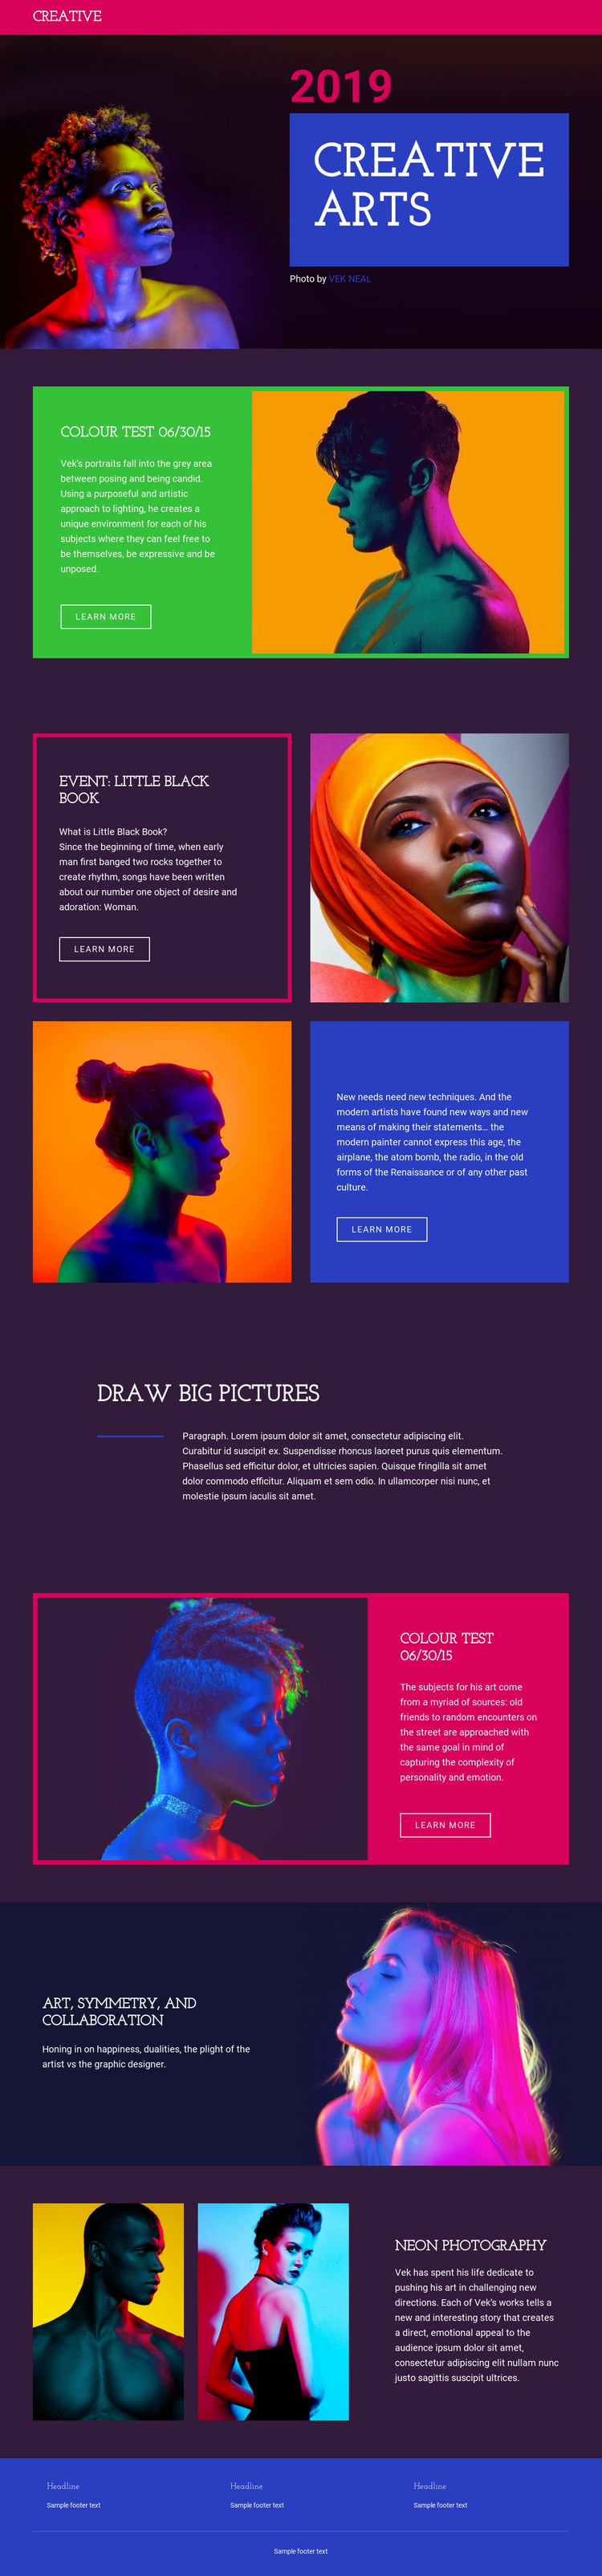 Limited-edition photography Web Design